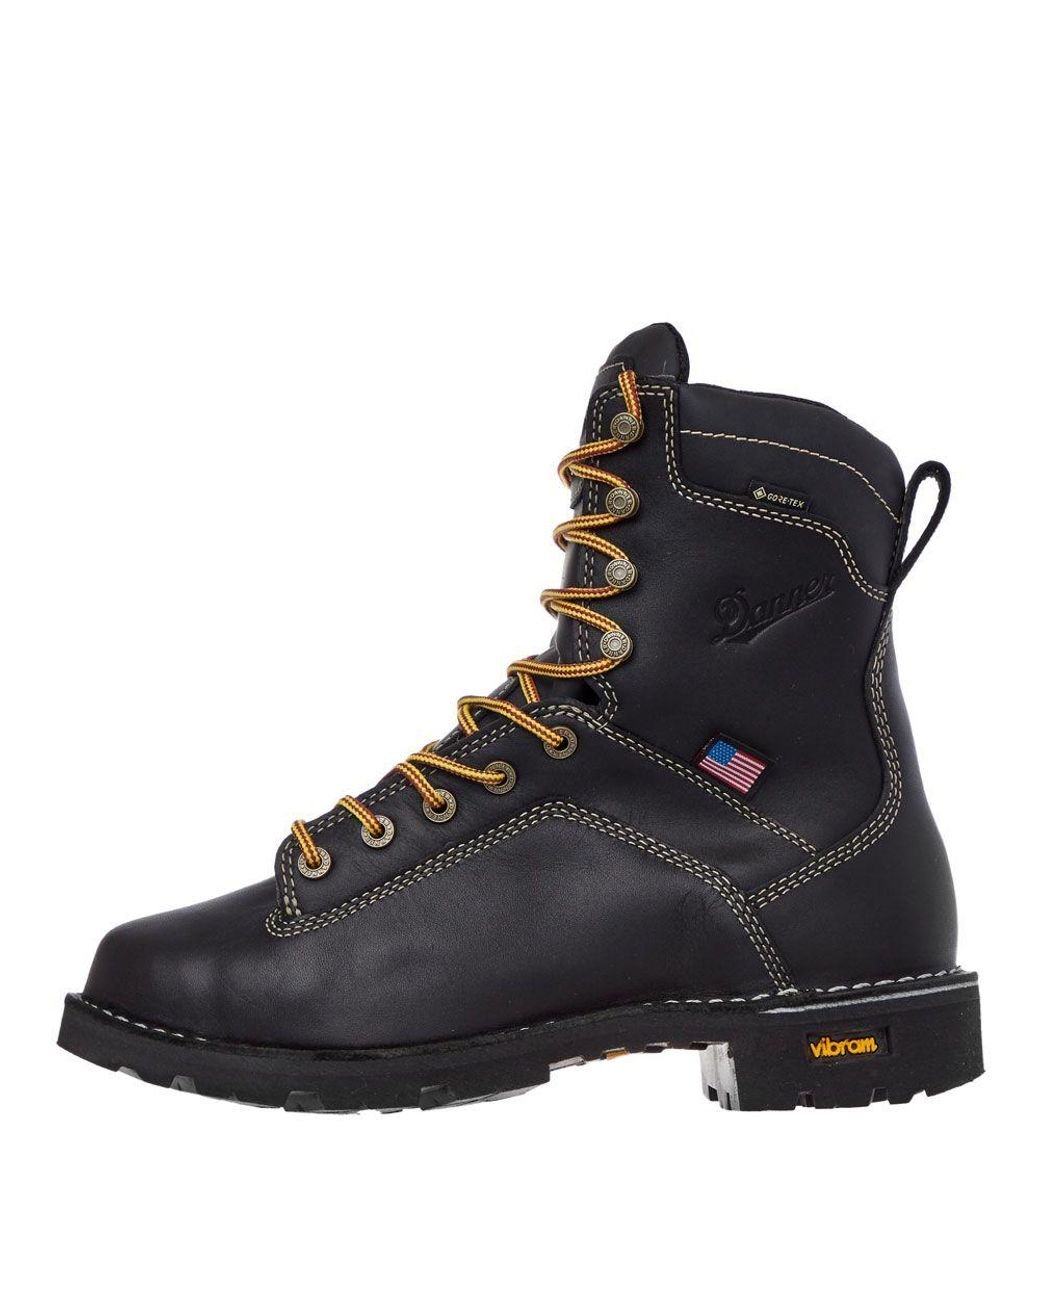 Danner Leather Quarry Usa Boots – Black for Men - Lyst